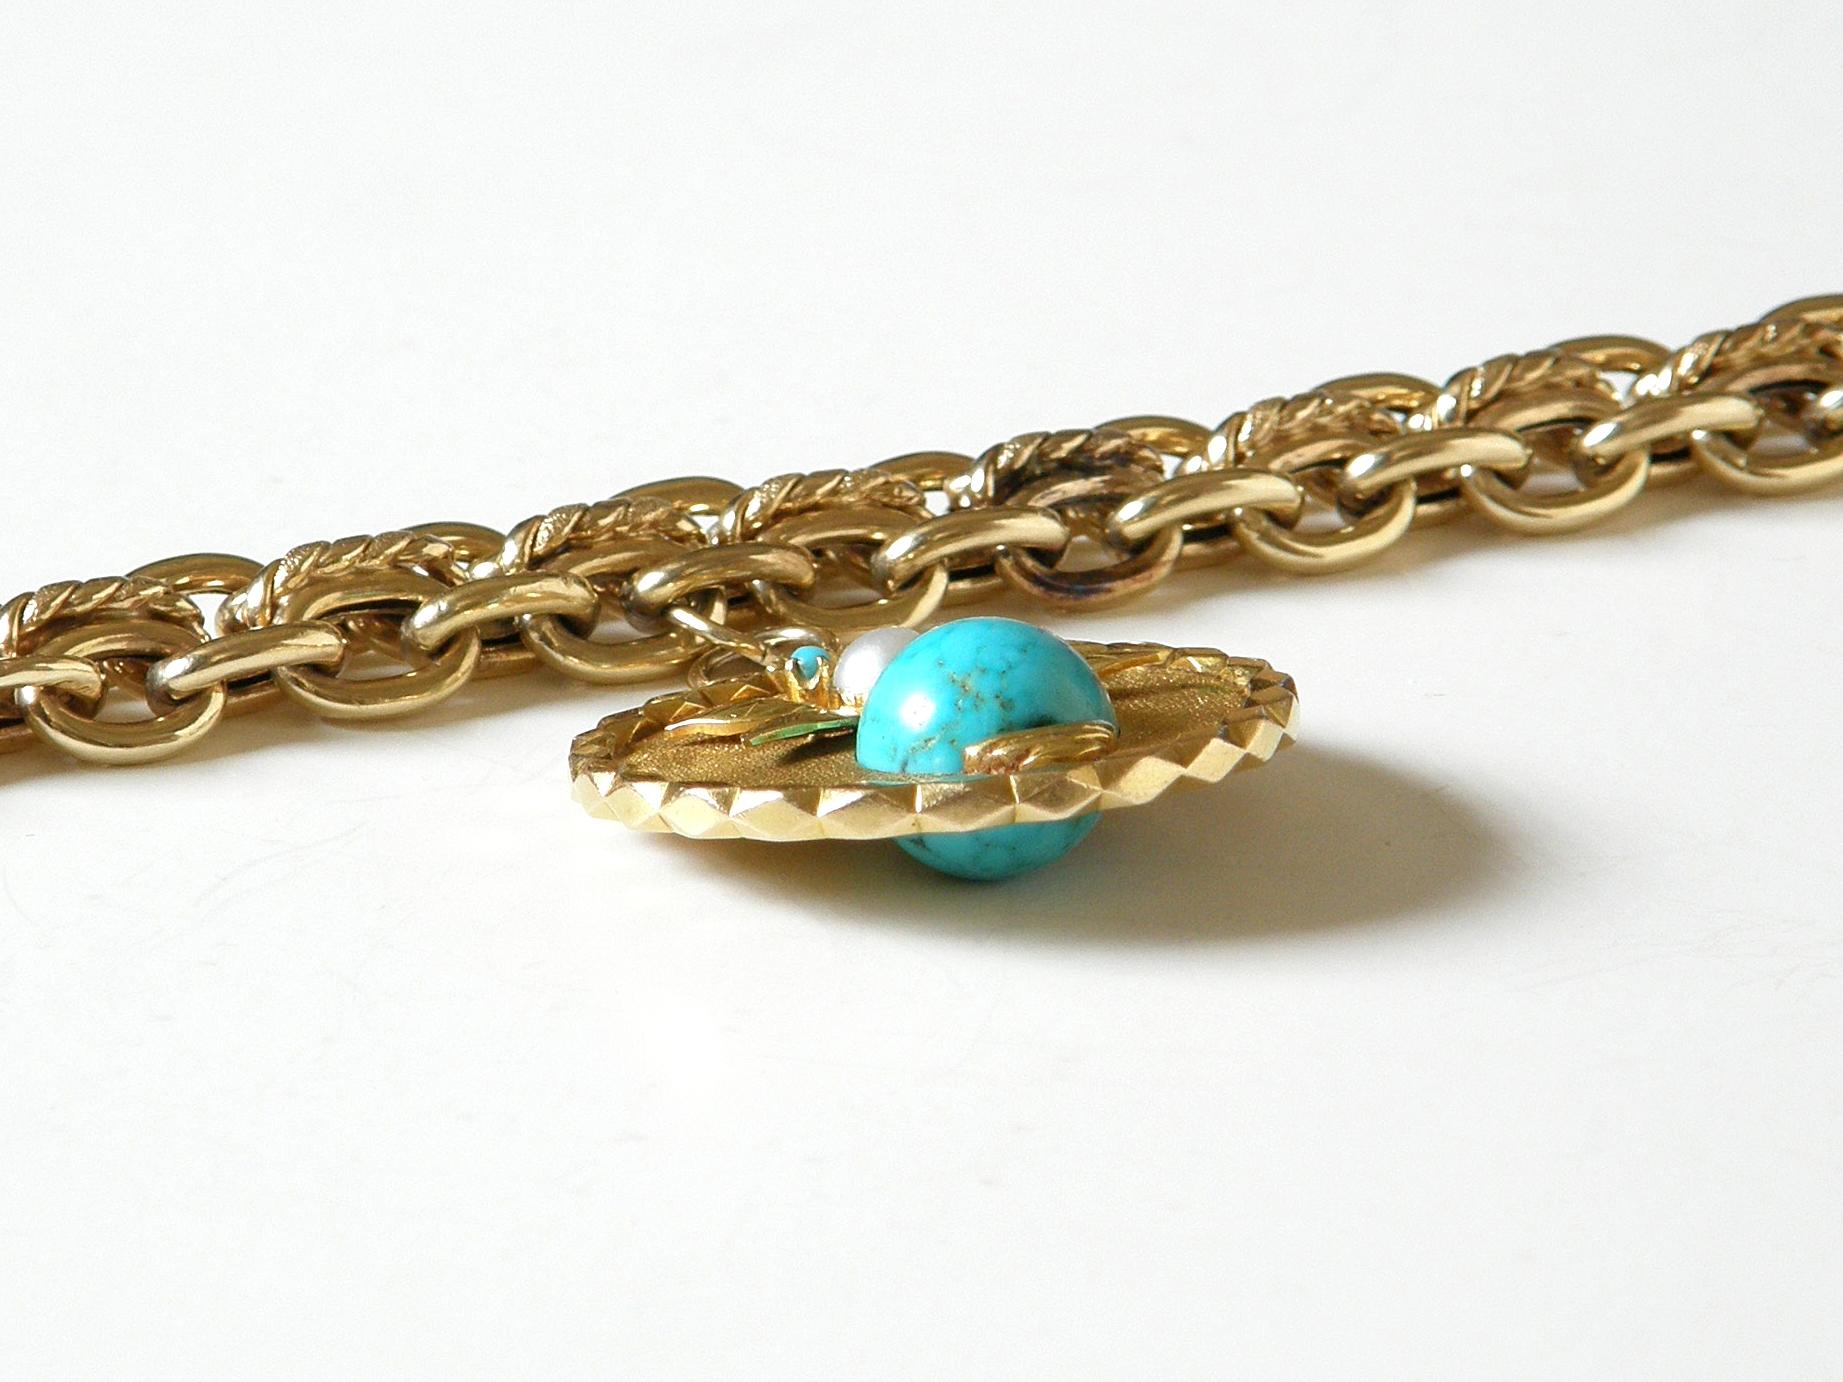 14K Gold Double Chain Link Bracelet with Giant Two Sided Spider and Fly Charm 2